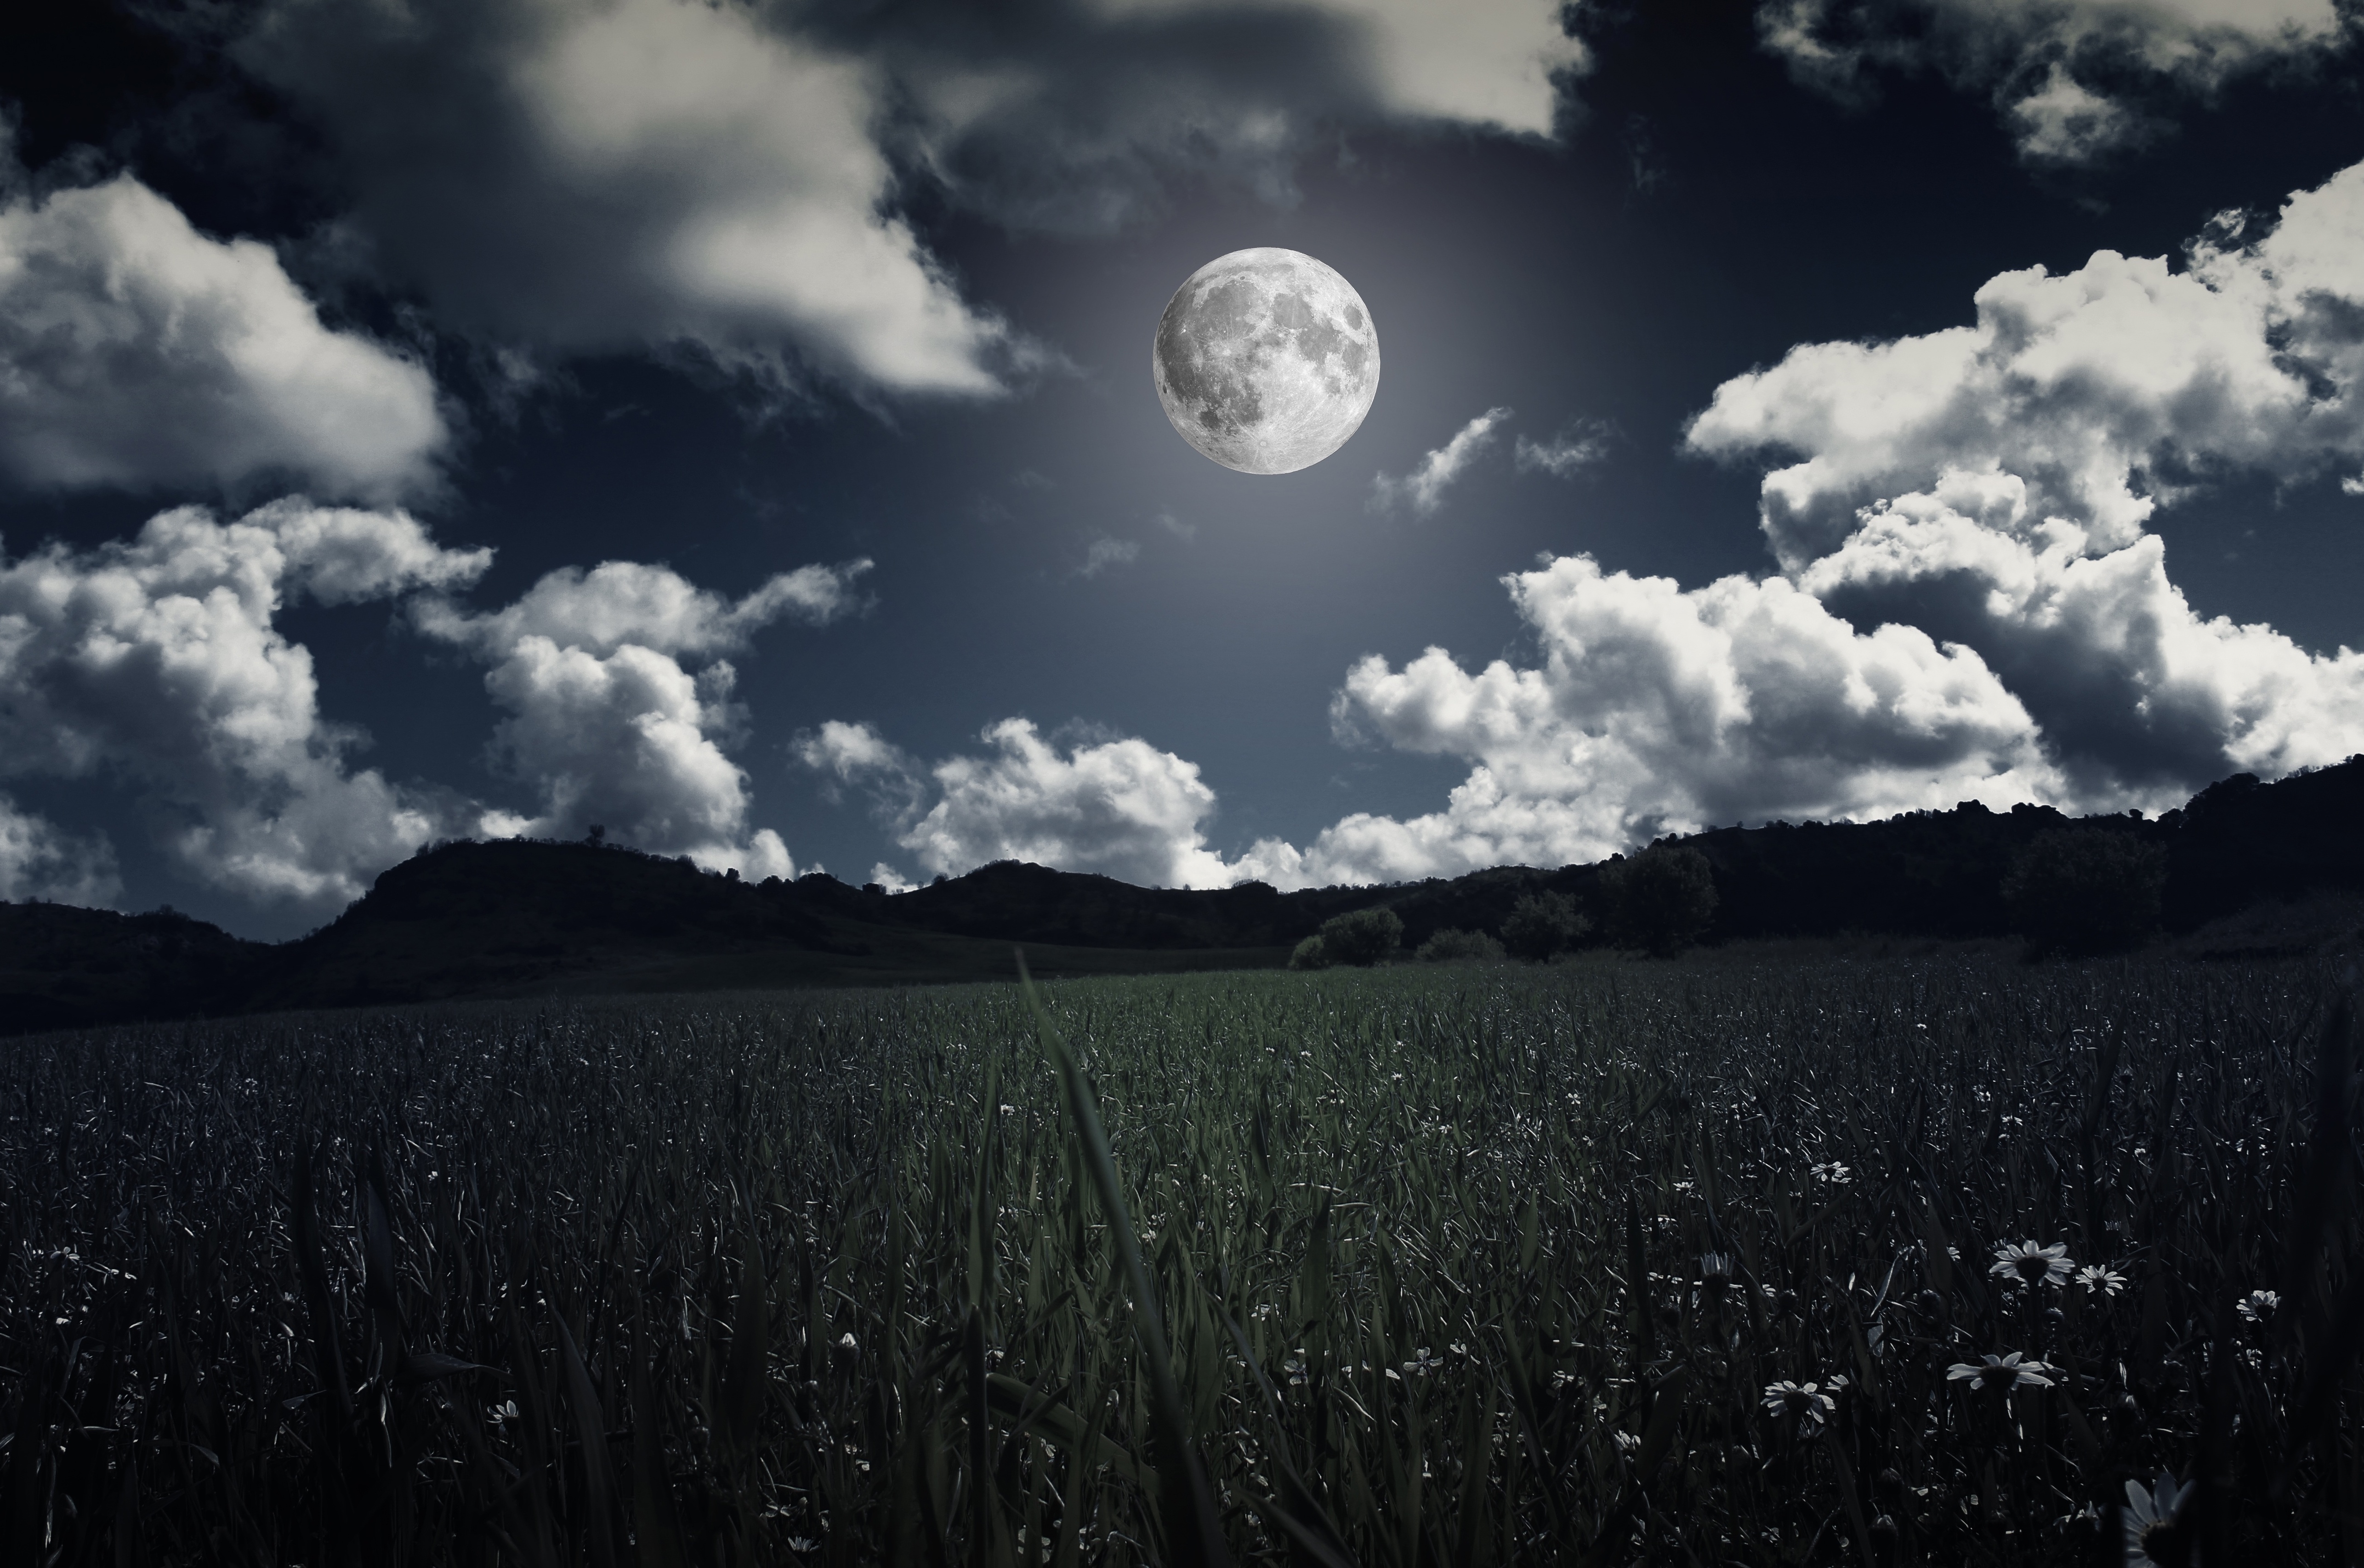 moon, full moon, grass, nature, clouds, field, photoshop